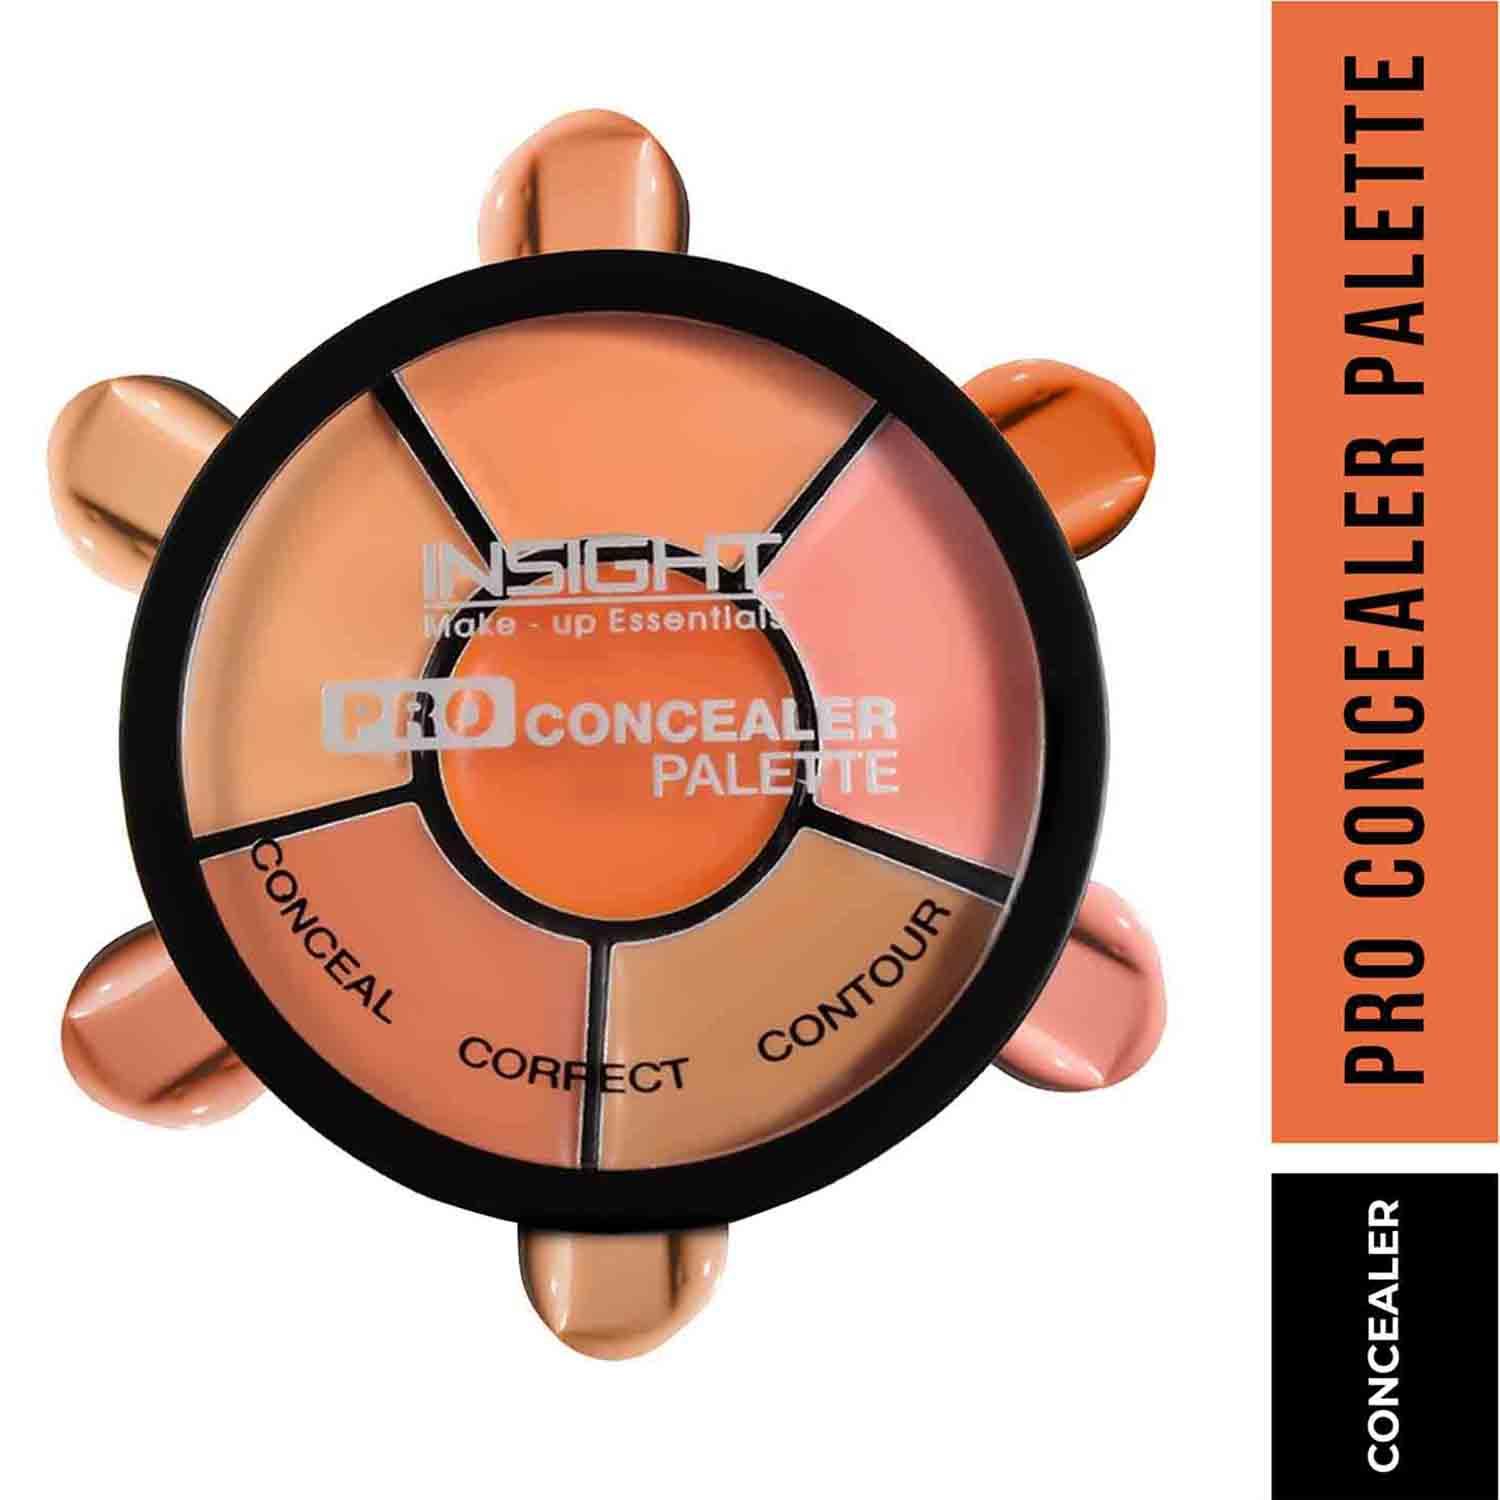 Insight Cosmetics | Insight Cosmetics Pro Concealer Palette - Concealer (15g)